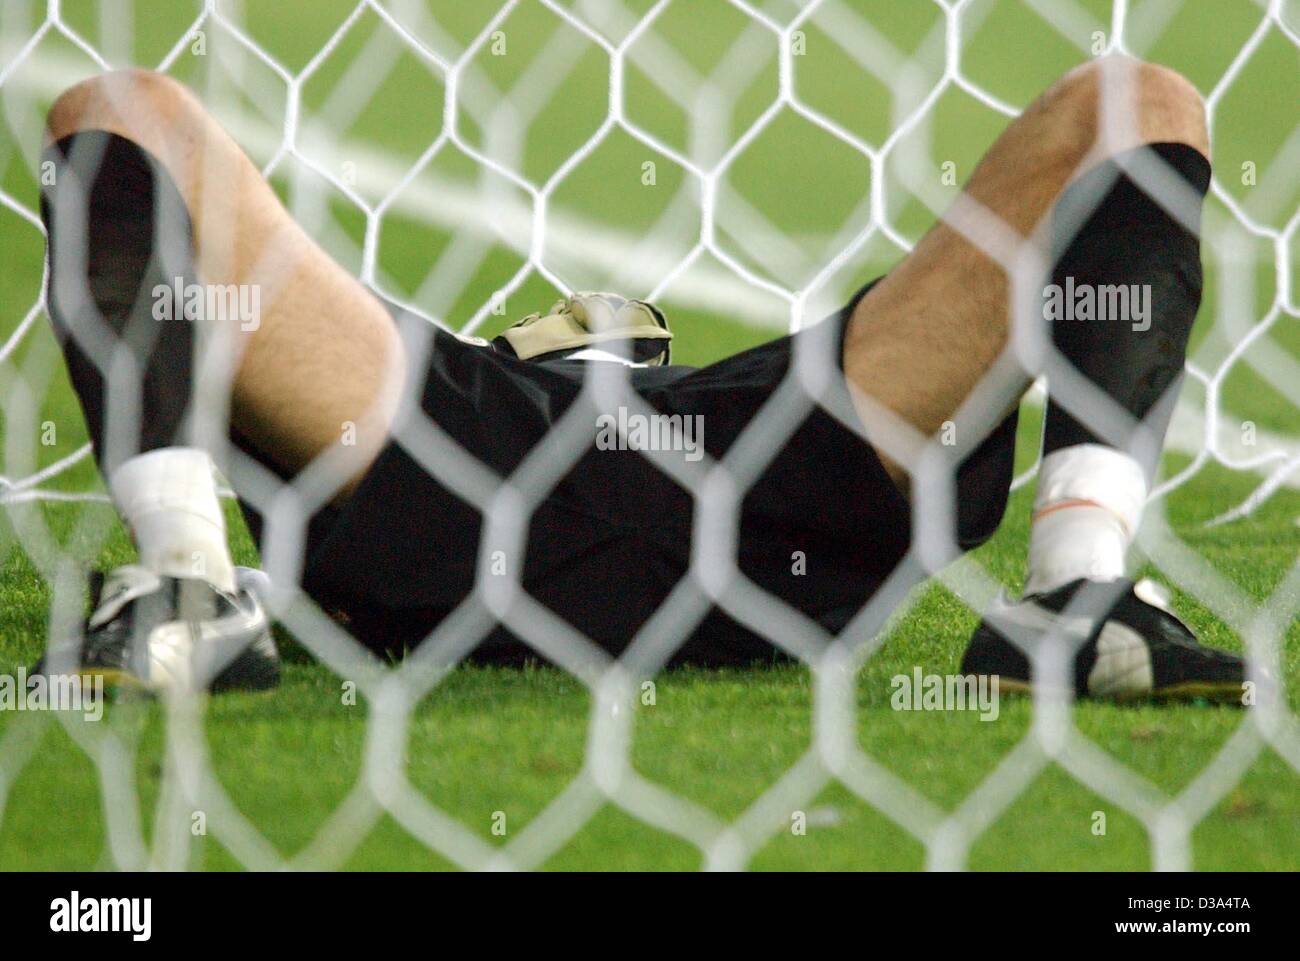 (dpa) - Italian goalkeeper Gianluigi Buffon lies frustrated on the pitch after losing the FIFA World Cup match versus South Korea in the stadium of Daejeon, South Korea, 18 June 2002. South Korea won 2:1 thanks to a golden goal in extra time. Stock Photo